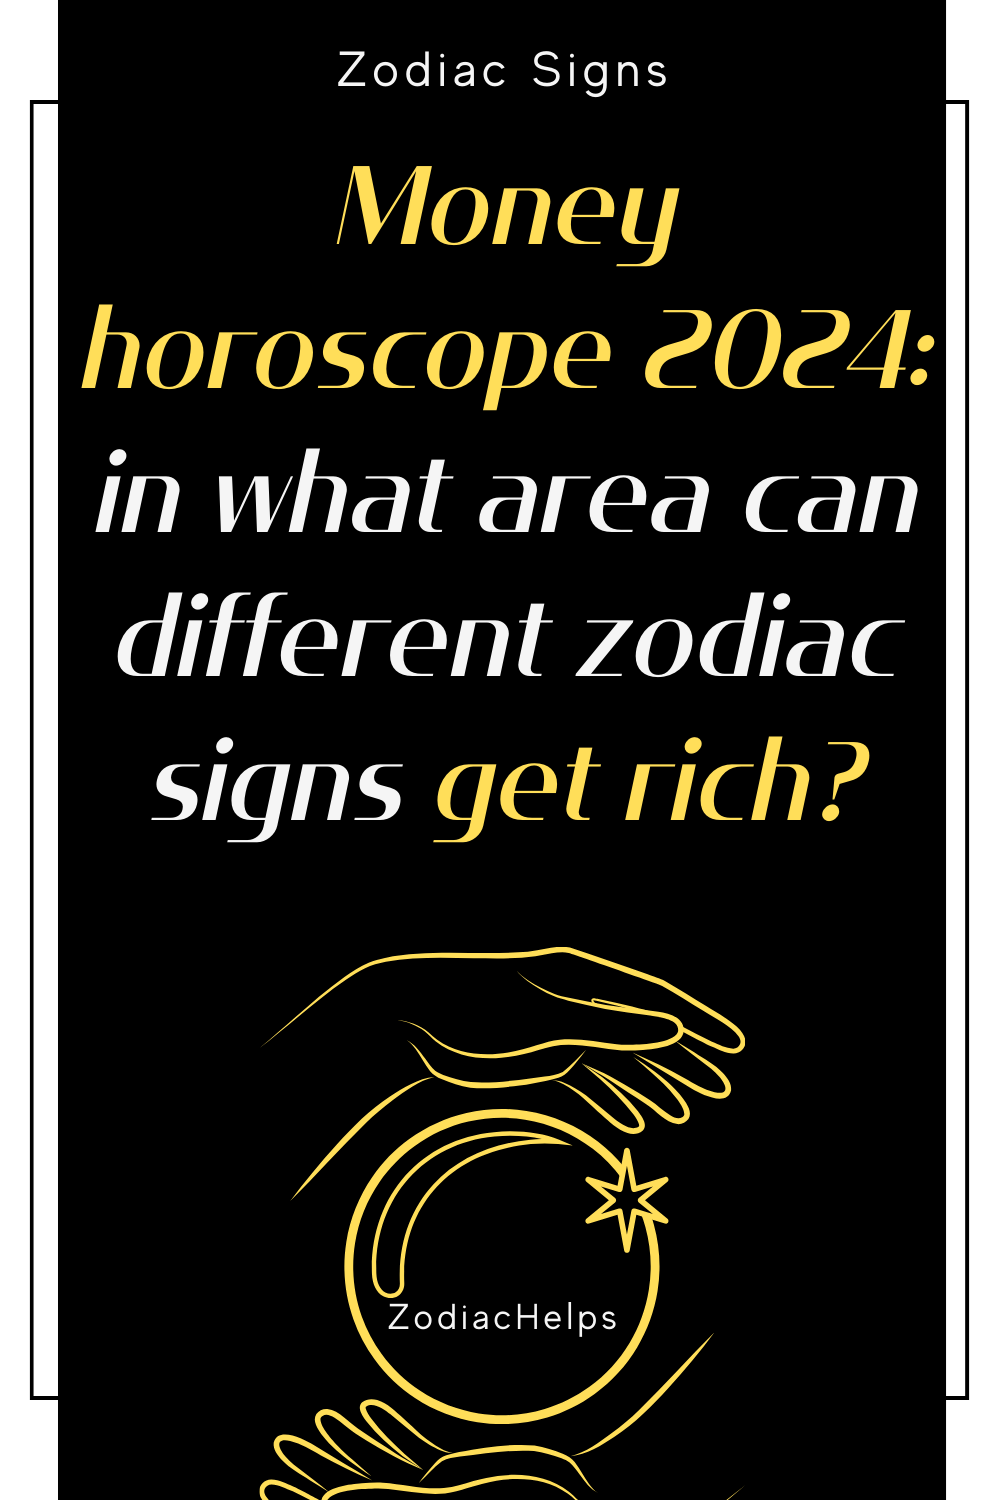 Money horoscope 2024 in what area can different zodiac signs get rich